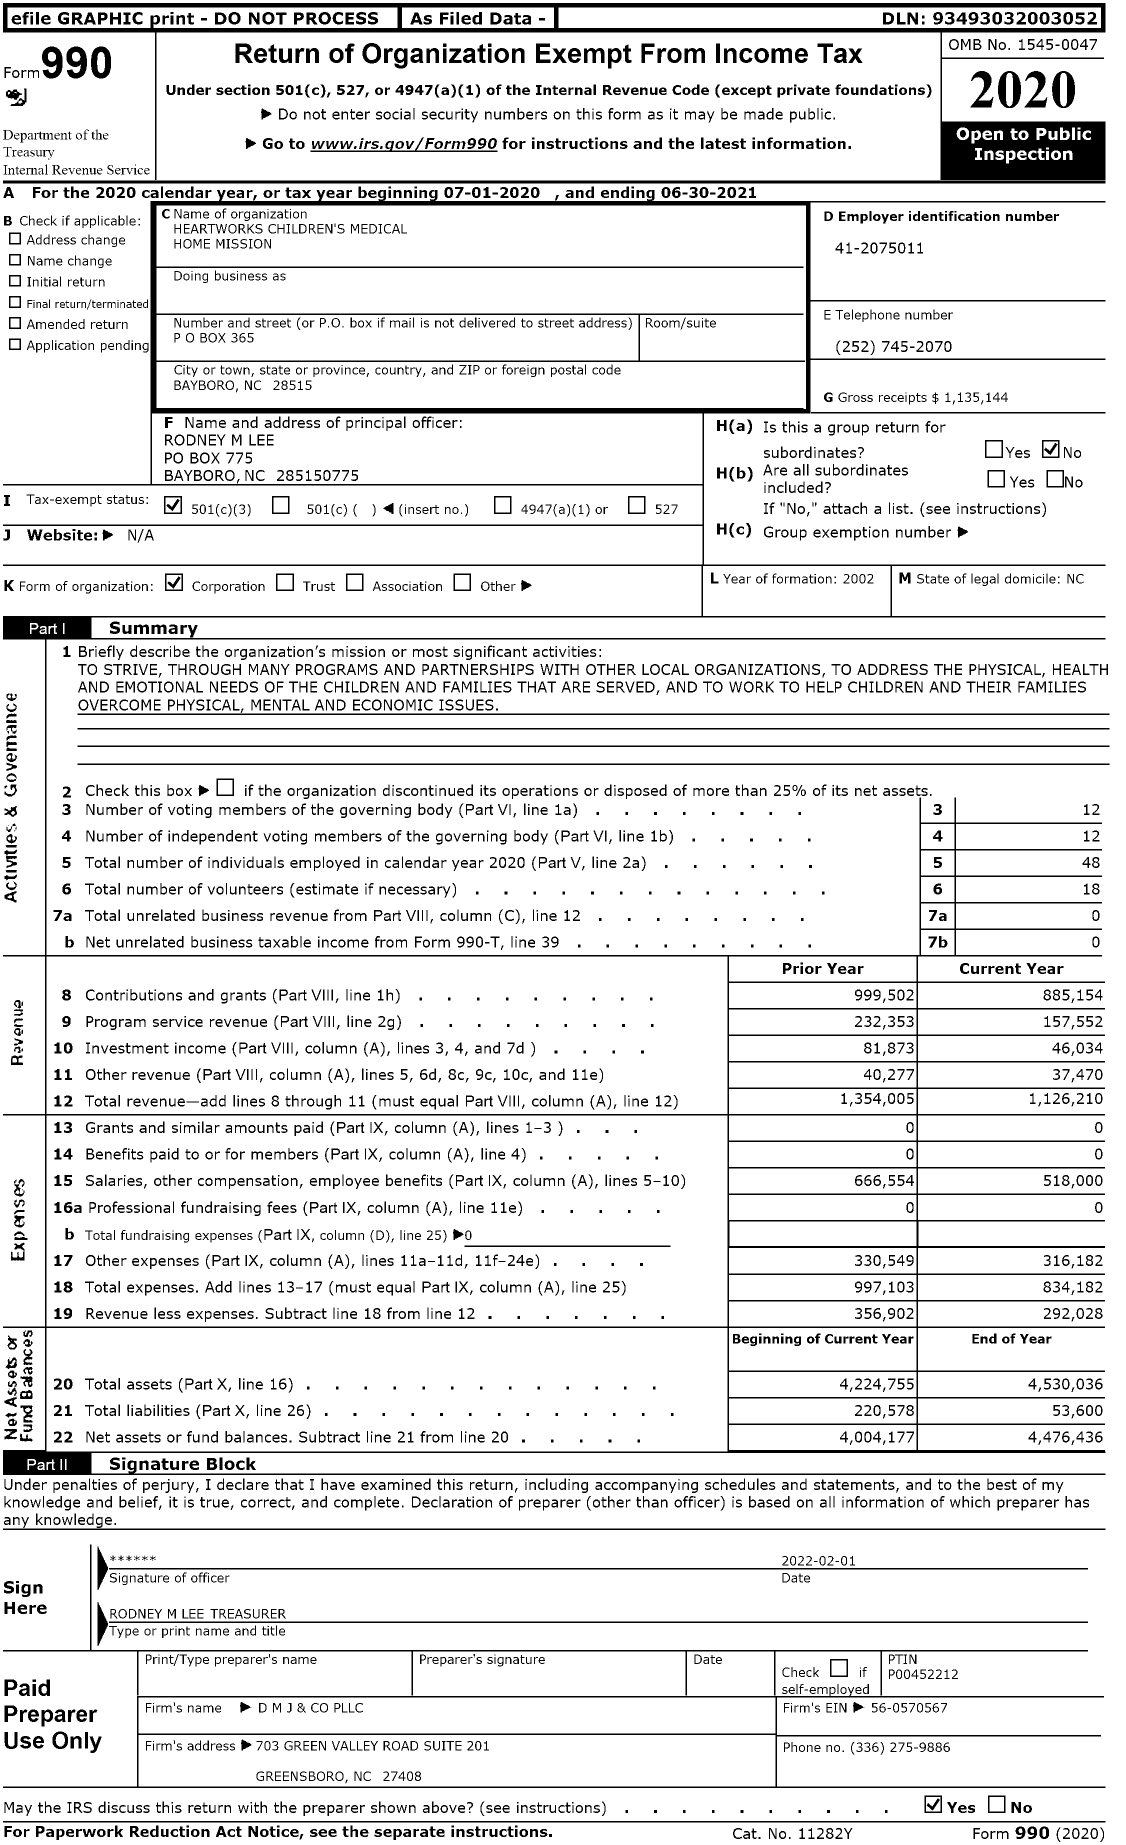 Image of first page of 2020 Form 990 for Heartworks Children's Medical Home Mission